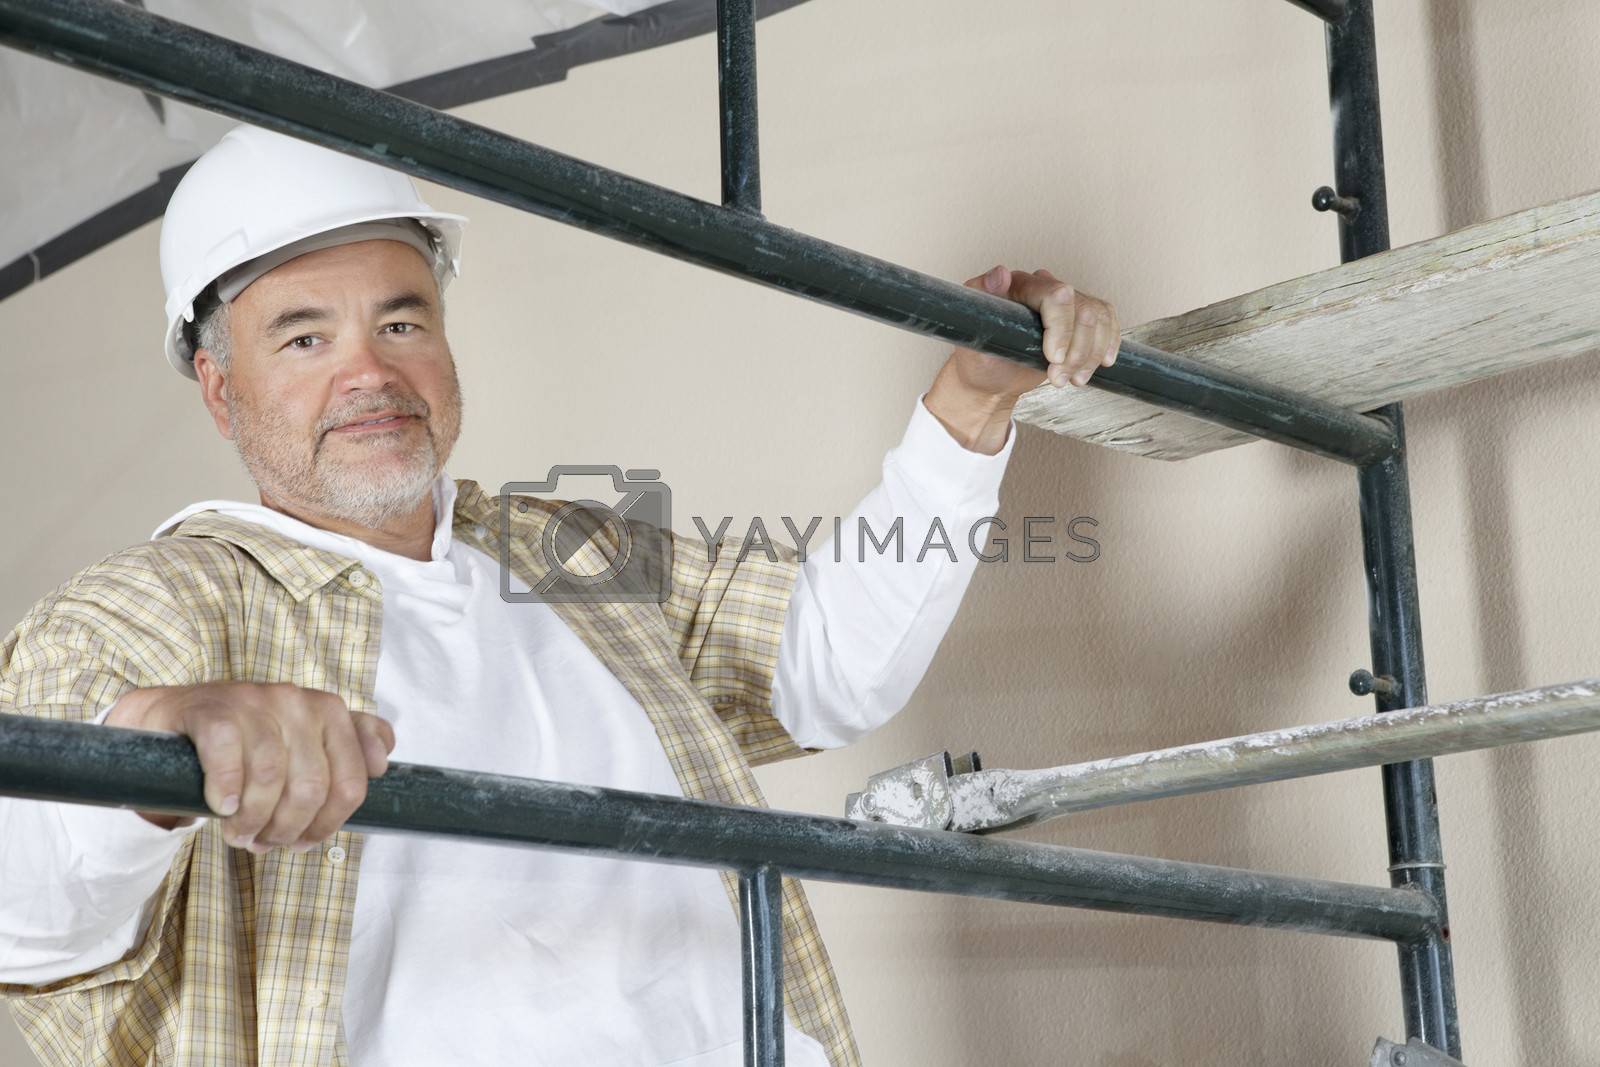 Royalty free image of Portrait of mature man climbing scaffold by moodboard